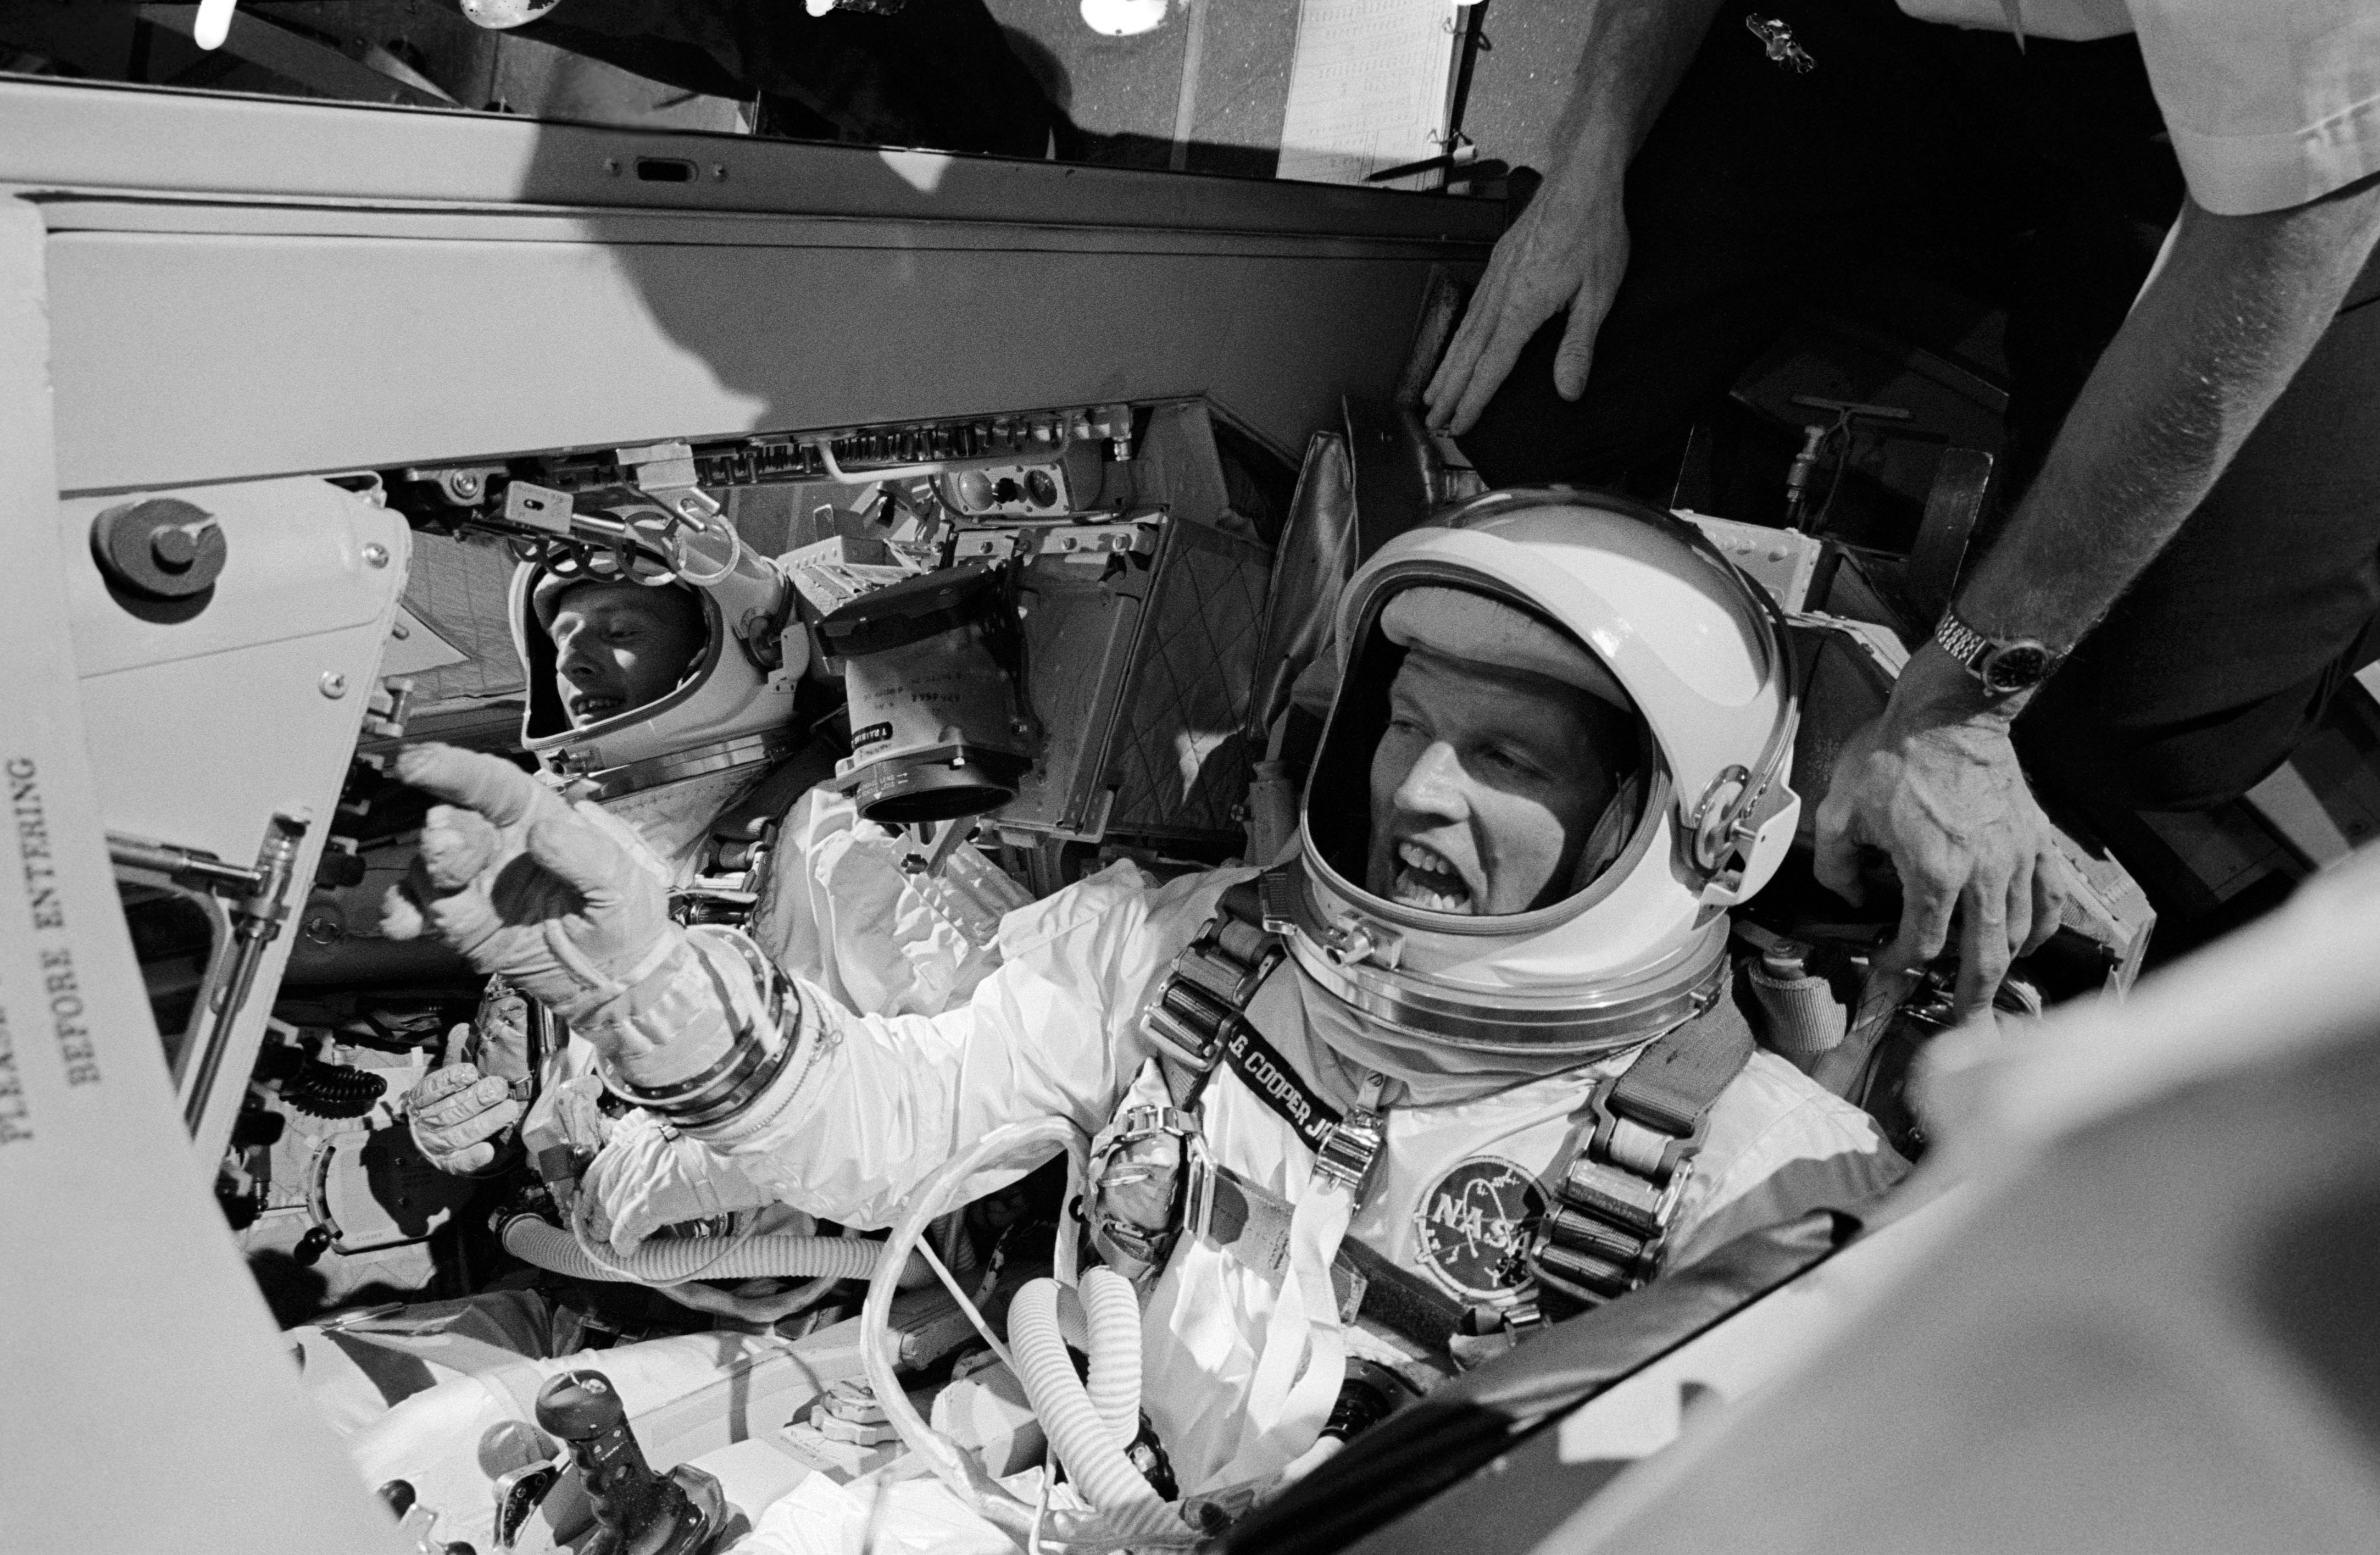 Illustrating the cramped nature of their eight-day home, astronauts Pete Conrad (background) and Gordo Cooper are in jubilant spirits ahead of their 21 August 1965 launch. Photo Credit: NASA